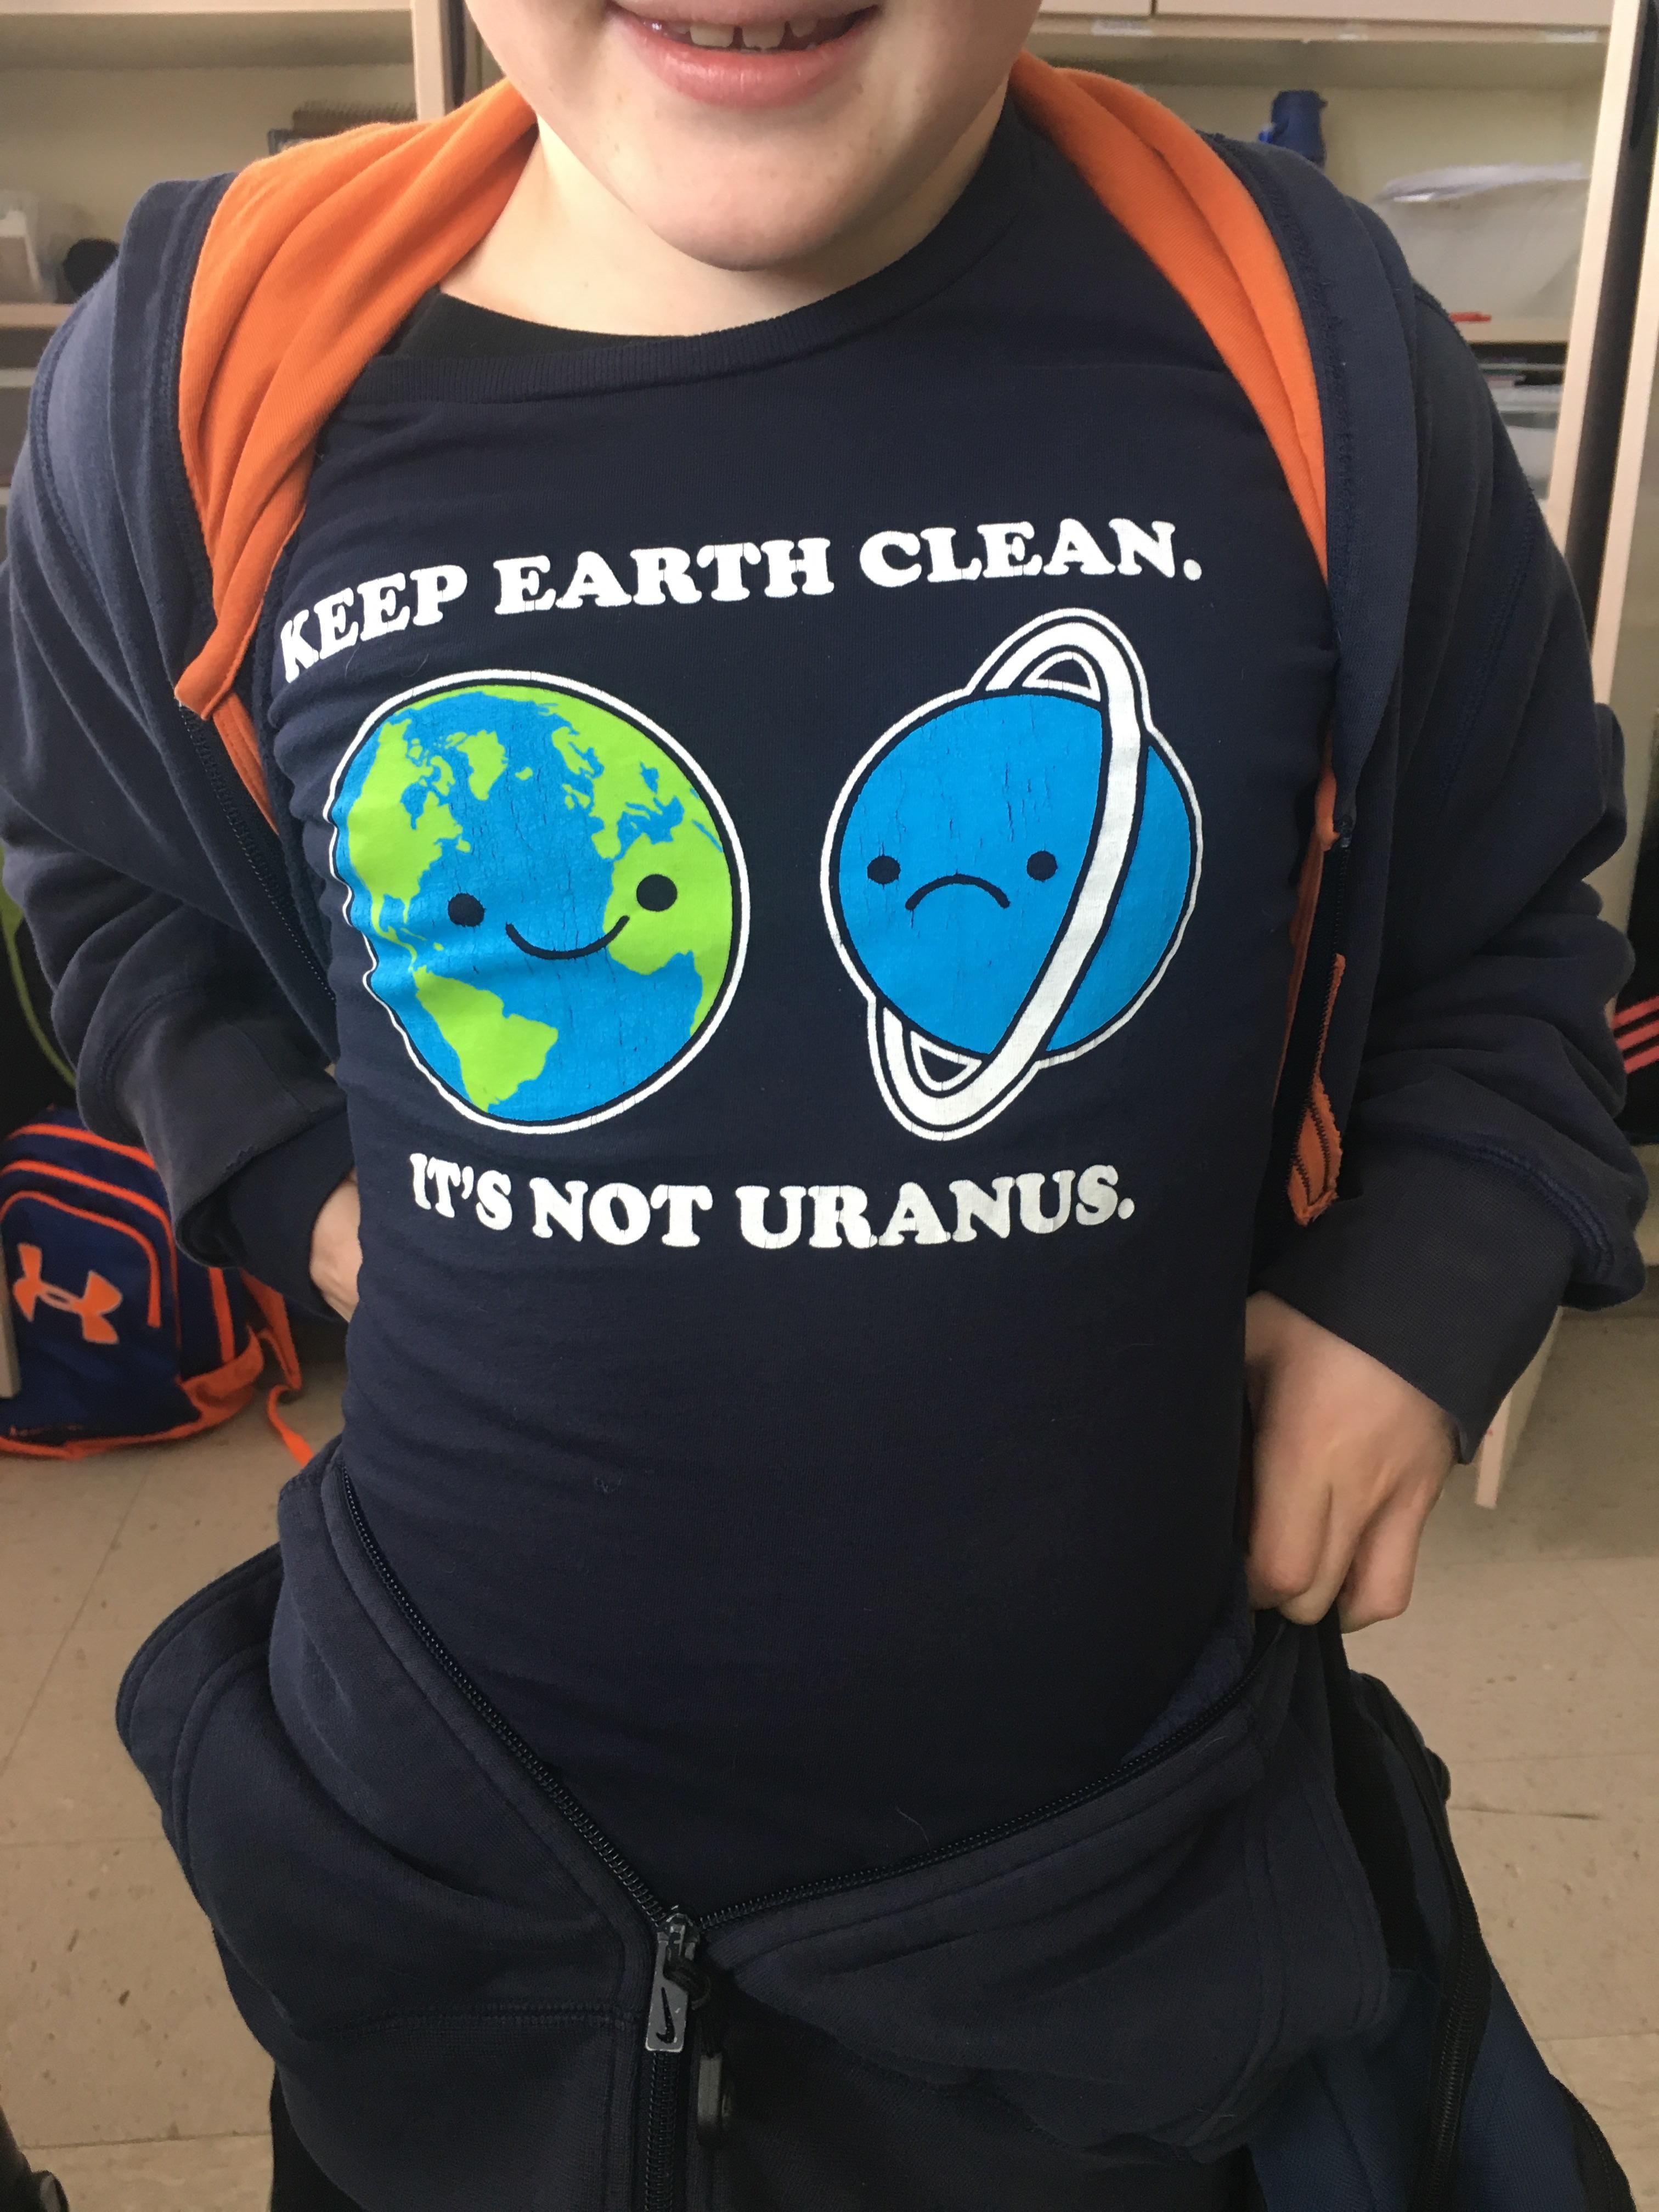 So this is the shirt one of my 4th grade students wore to school today.